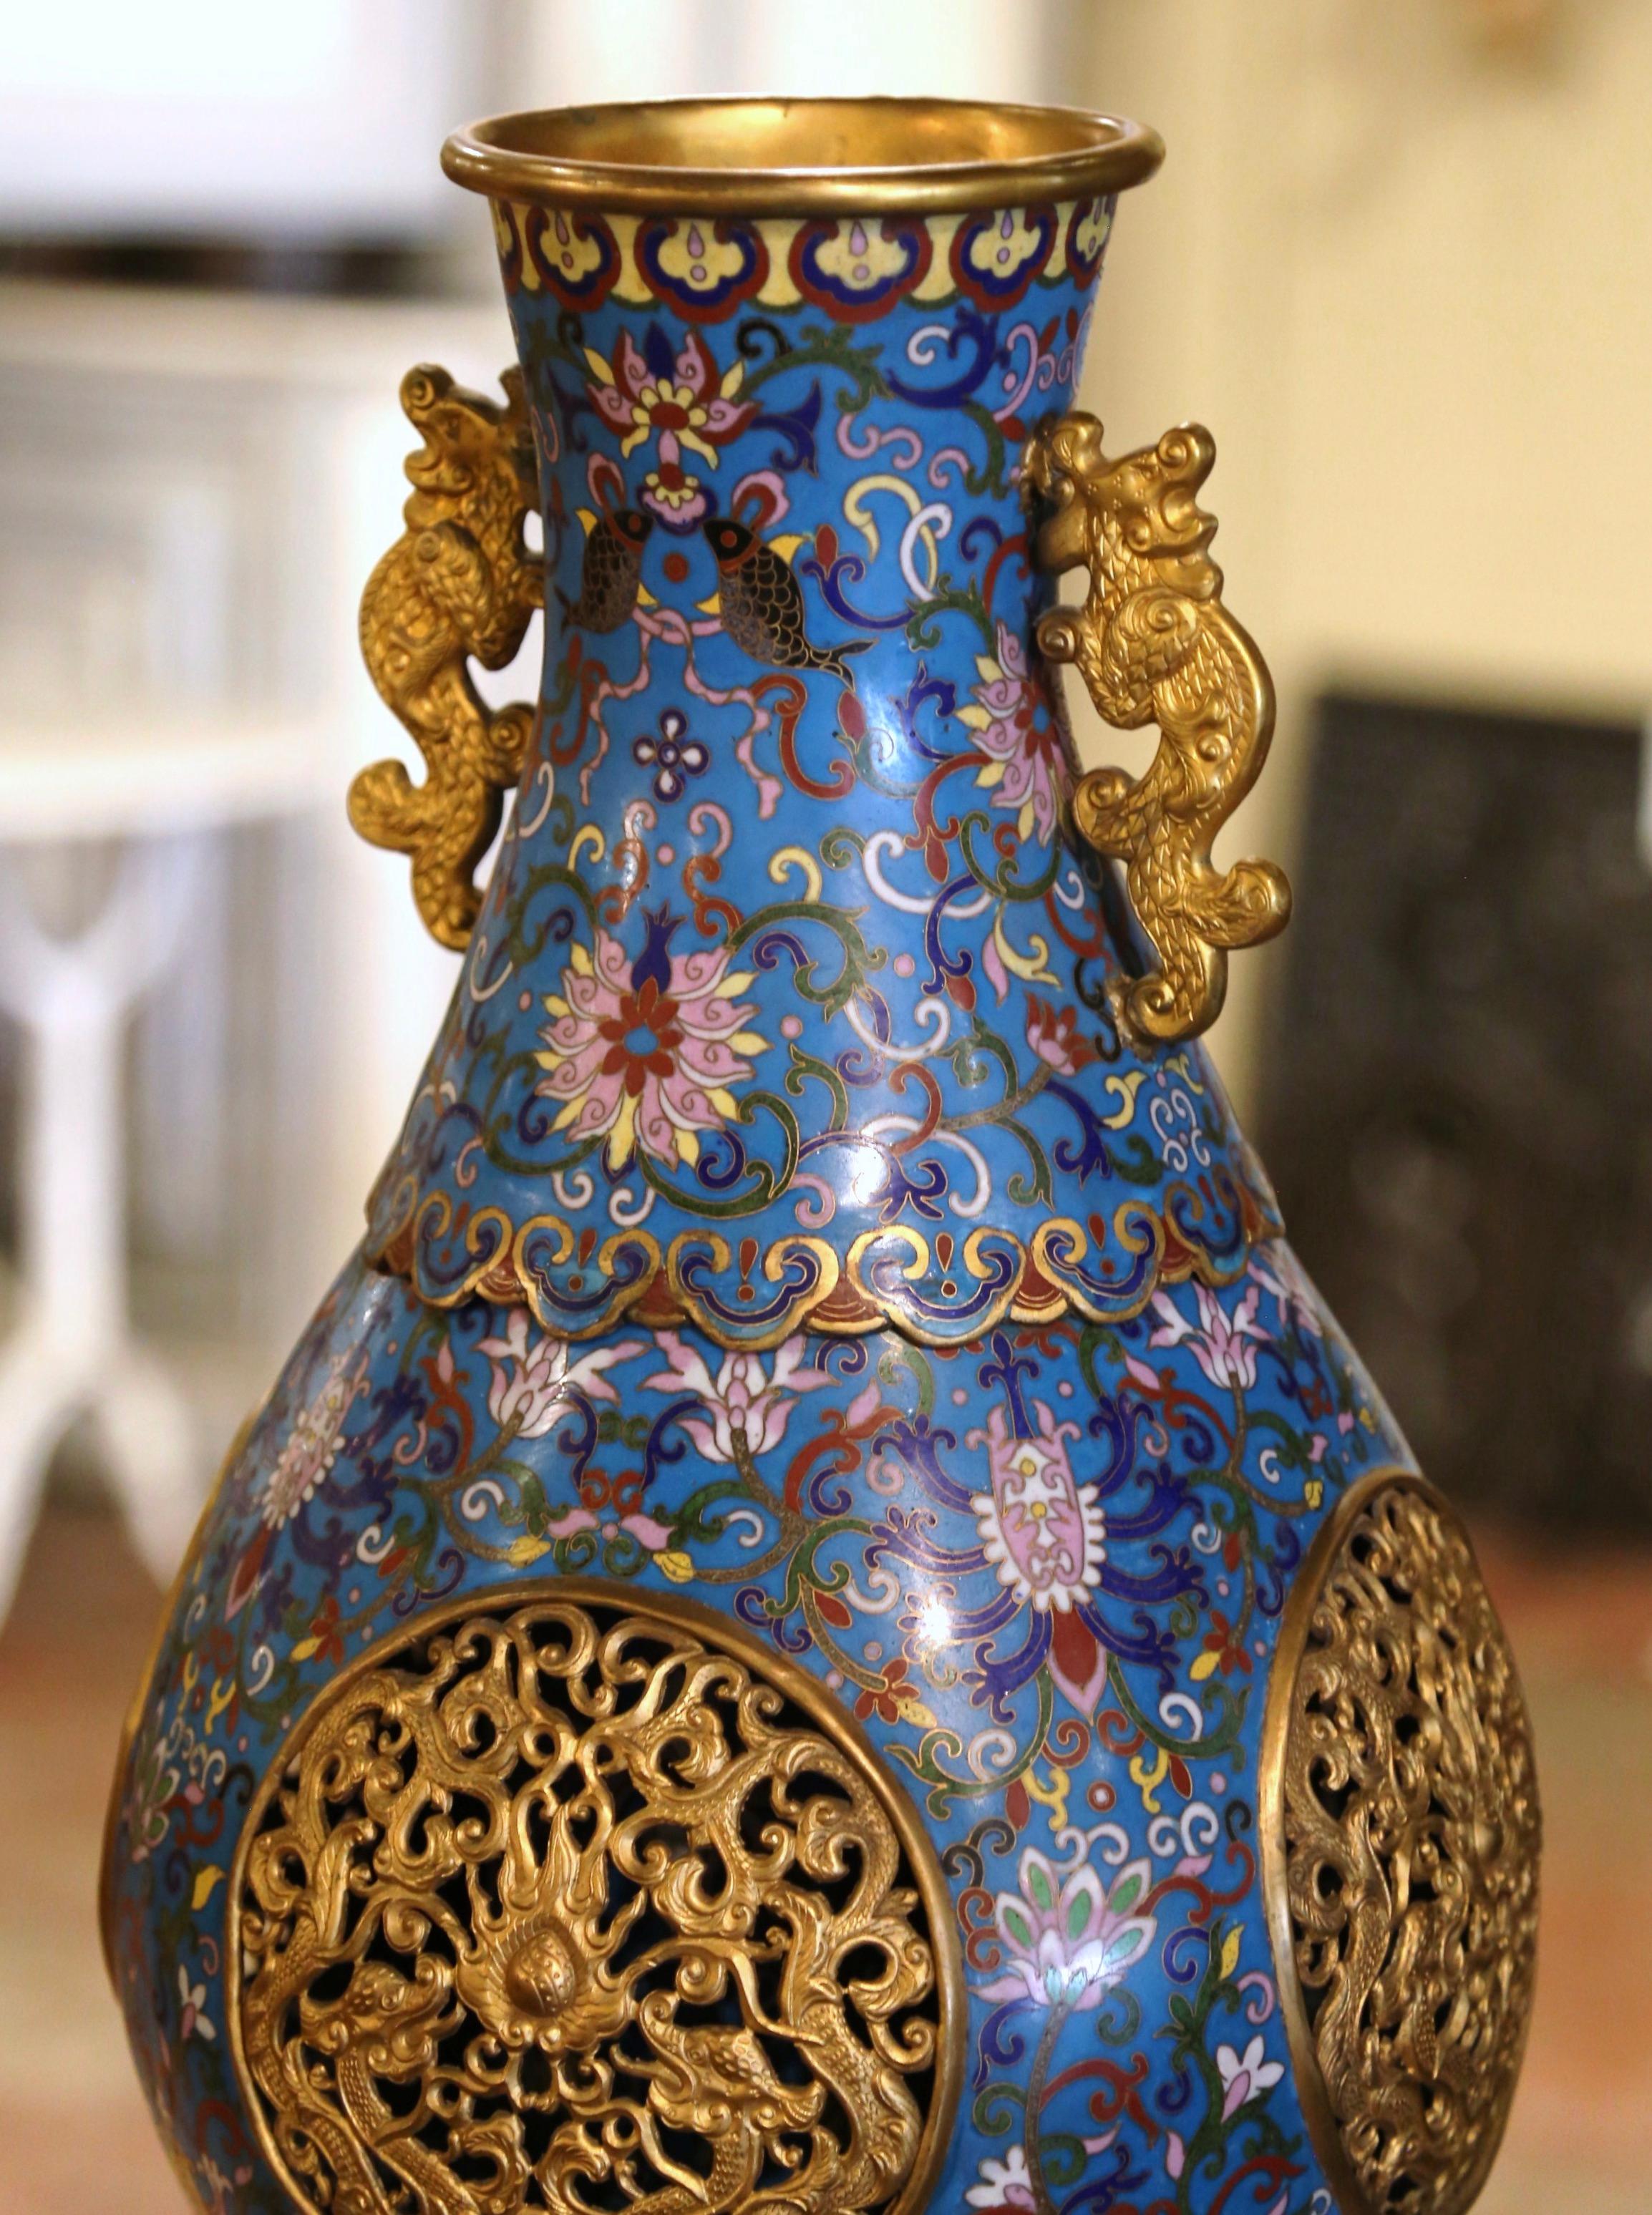 Cloissoné 19th Century Chinese Cloisonne Enamel Reticulated Vase on Stand For Sale